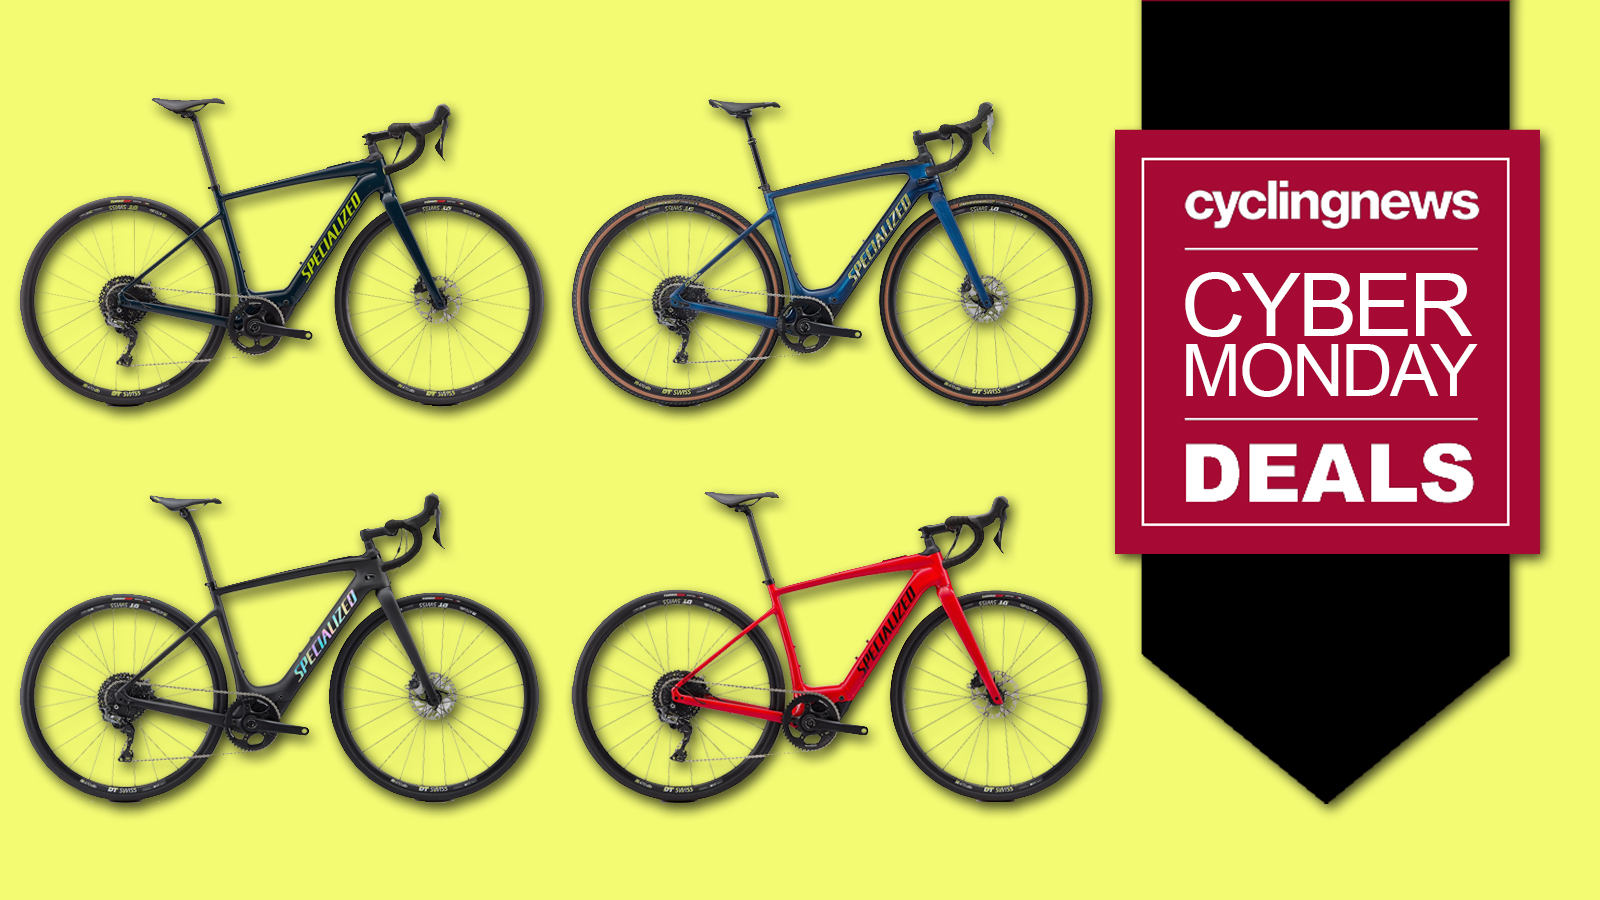 Get 20% off seven Specialized eBikes in the Mikeu0027s Bikes Cyber 